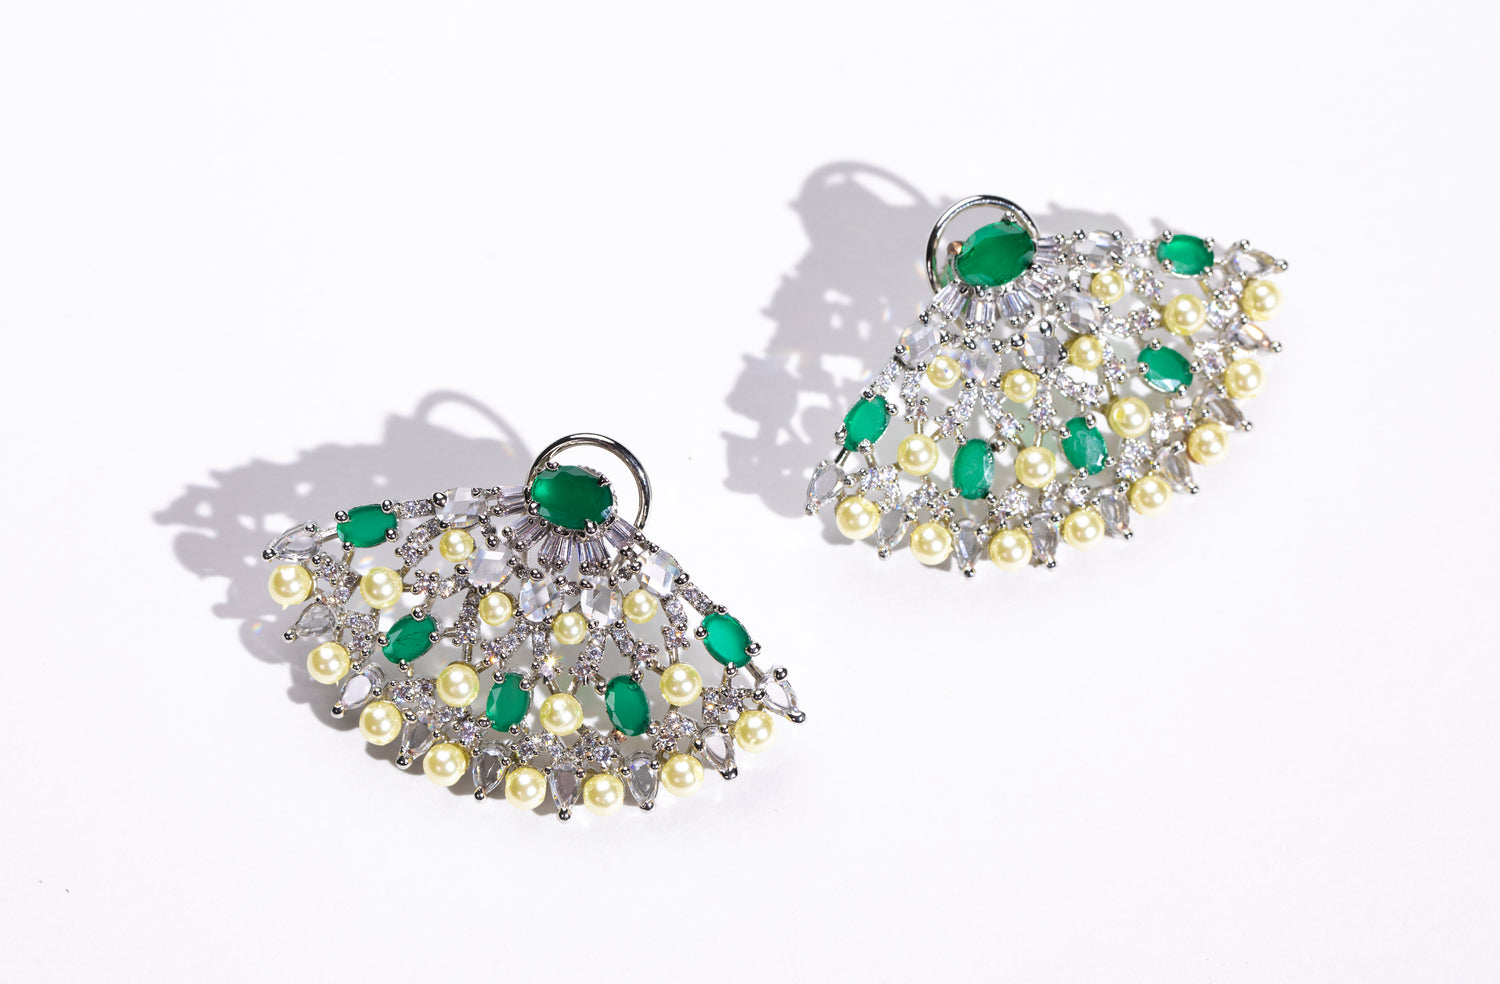 Fashionable Statement Earrings: Complete your outfit with these unique earrings, perfect for fashion-forward women